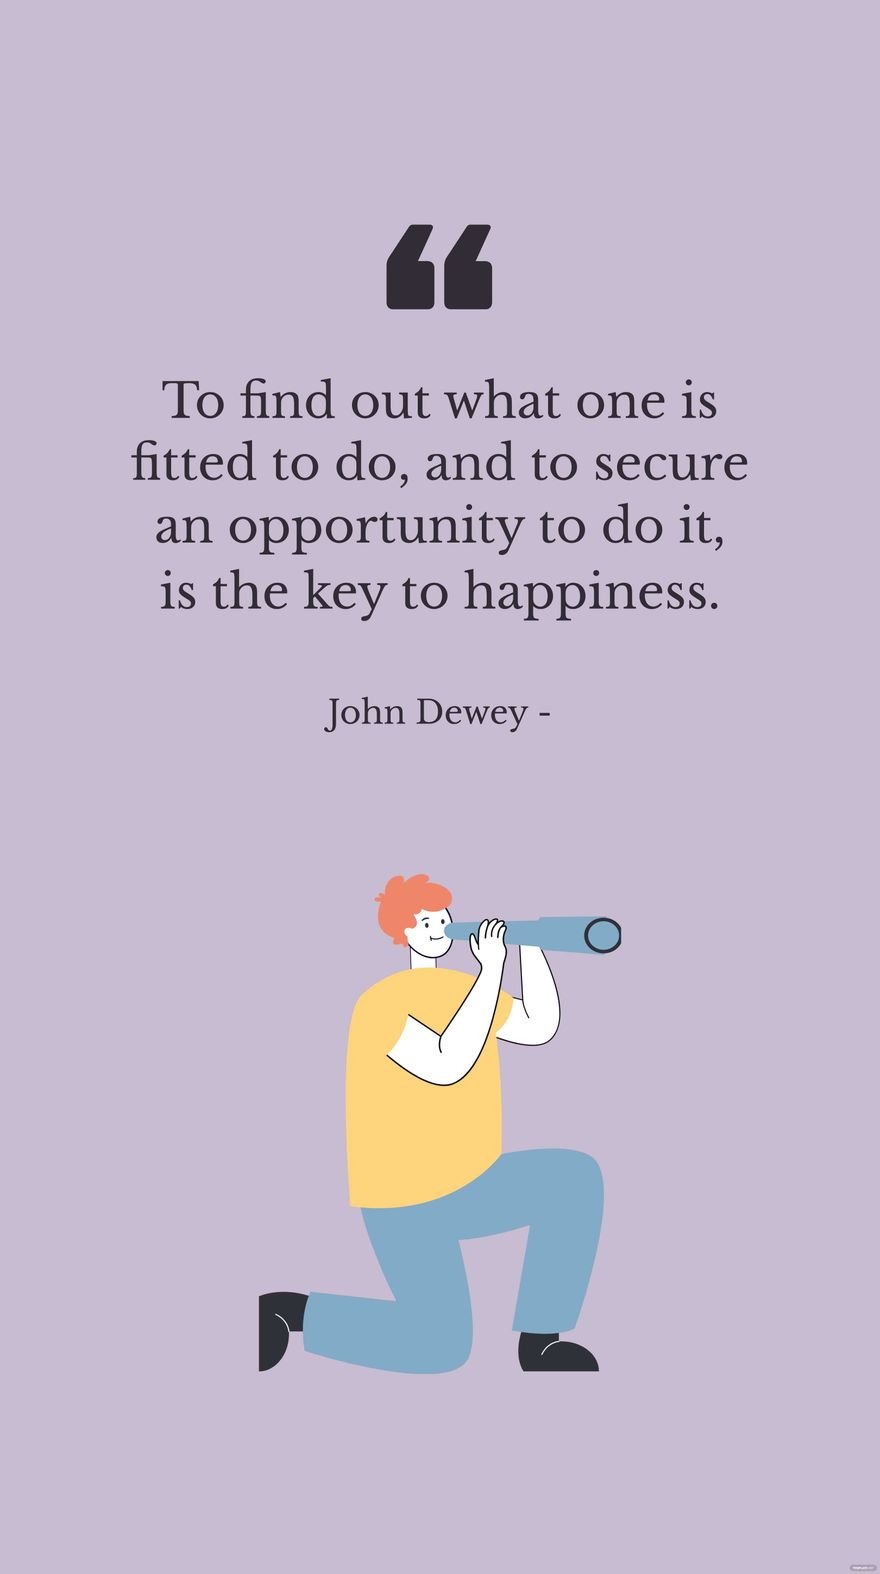 John Dewey - To find out what one is fitted to do, and to secure an opportunity to do it, is the key to happiness.